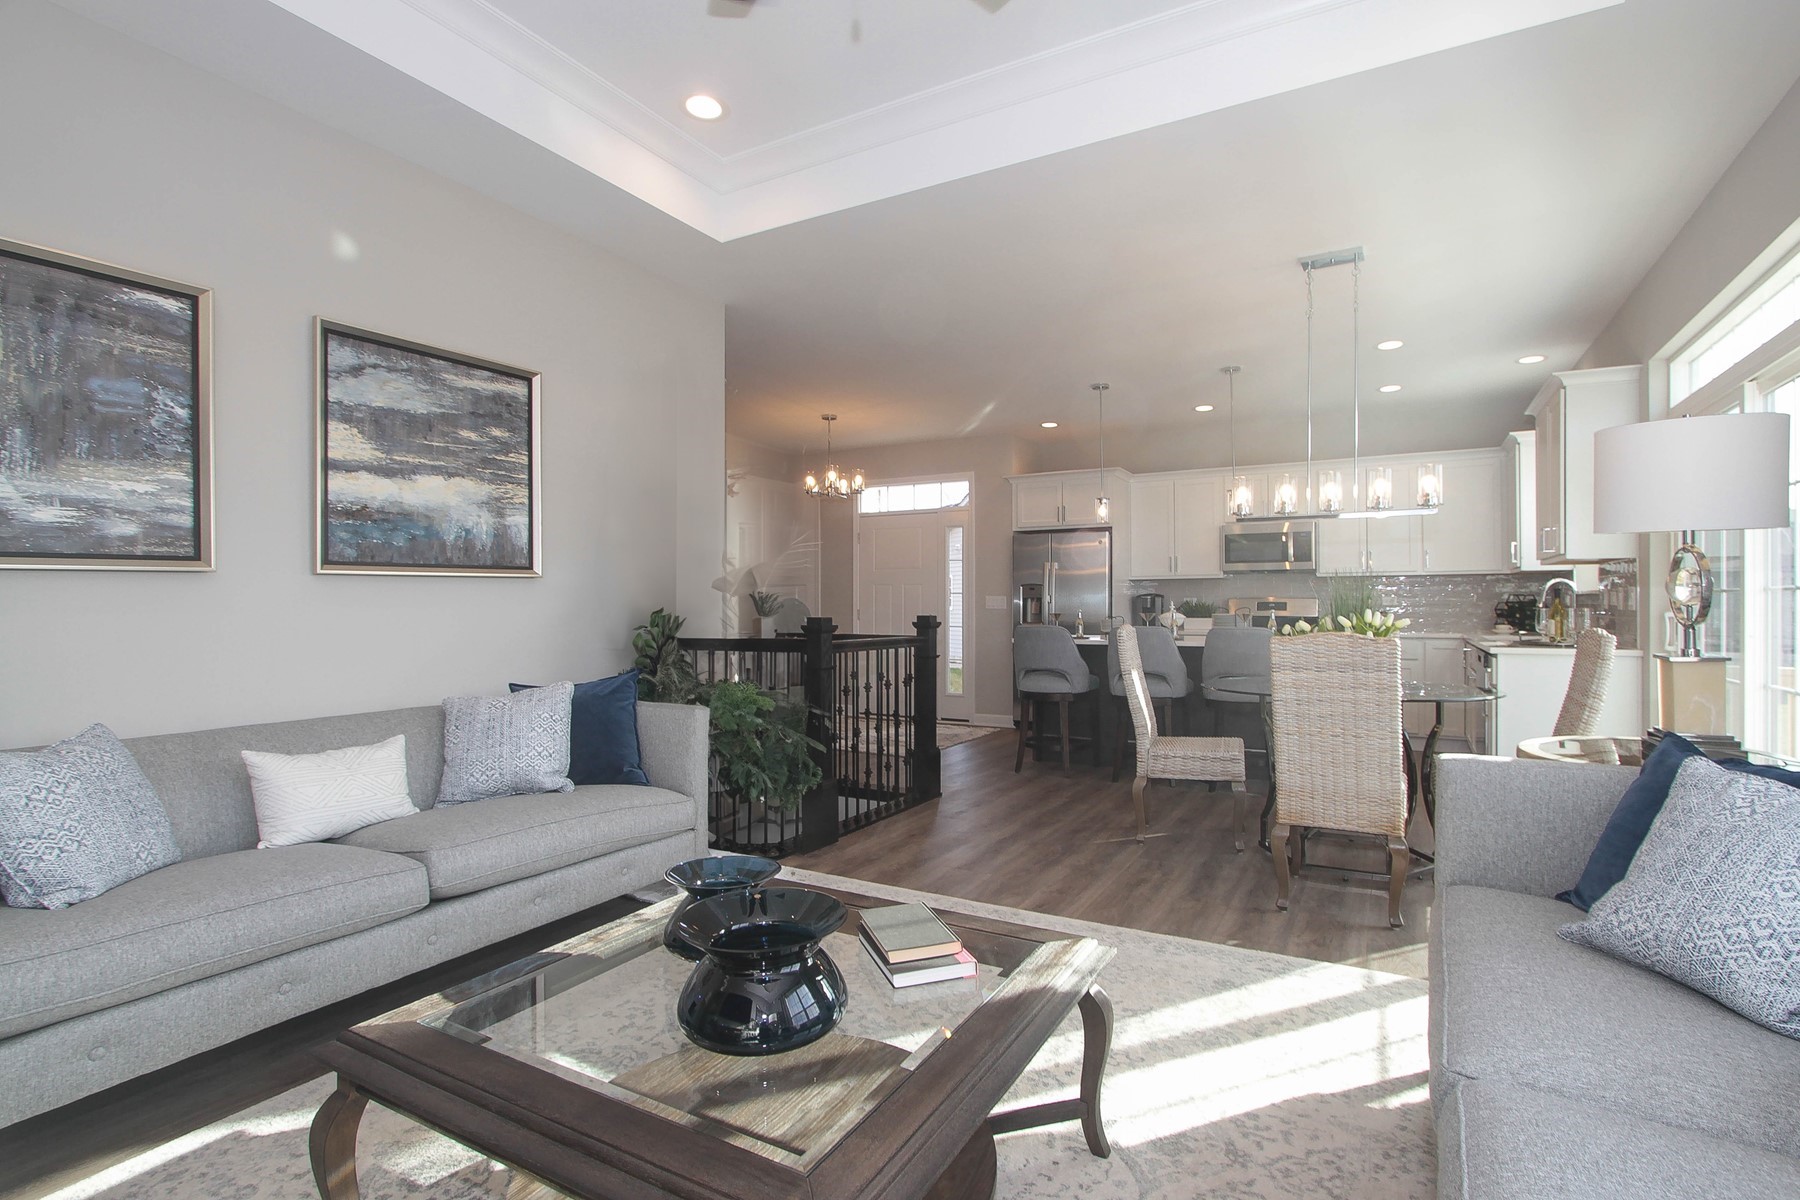 The Geneva ranch townhome at The Villas at Madison Lane showcases today’s popular open-concept design.